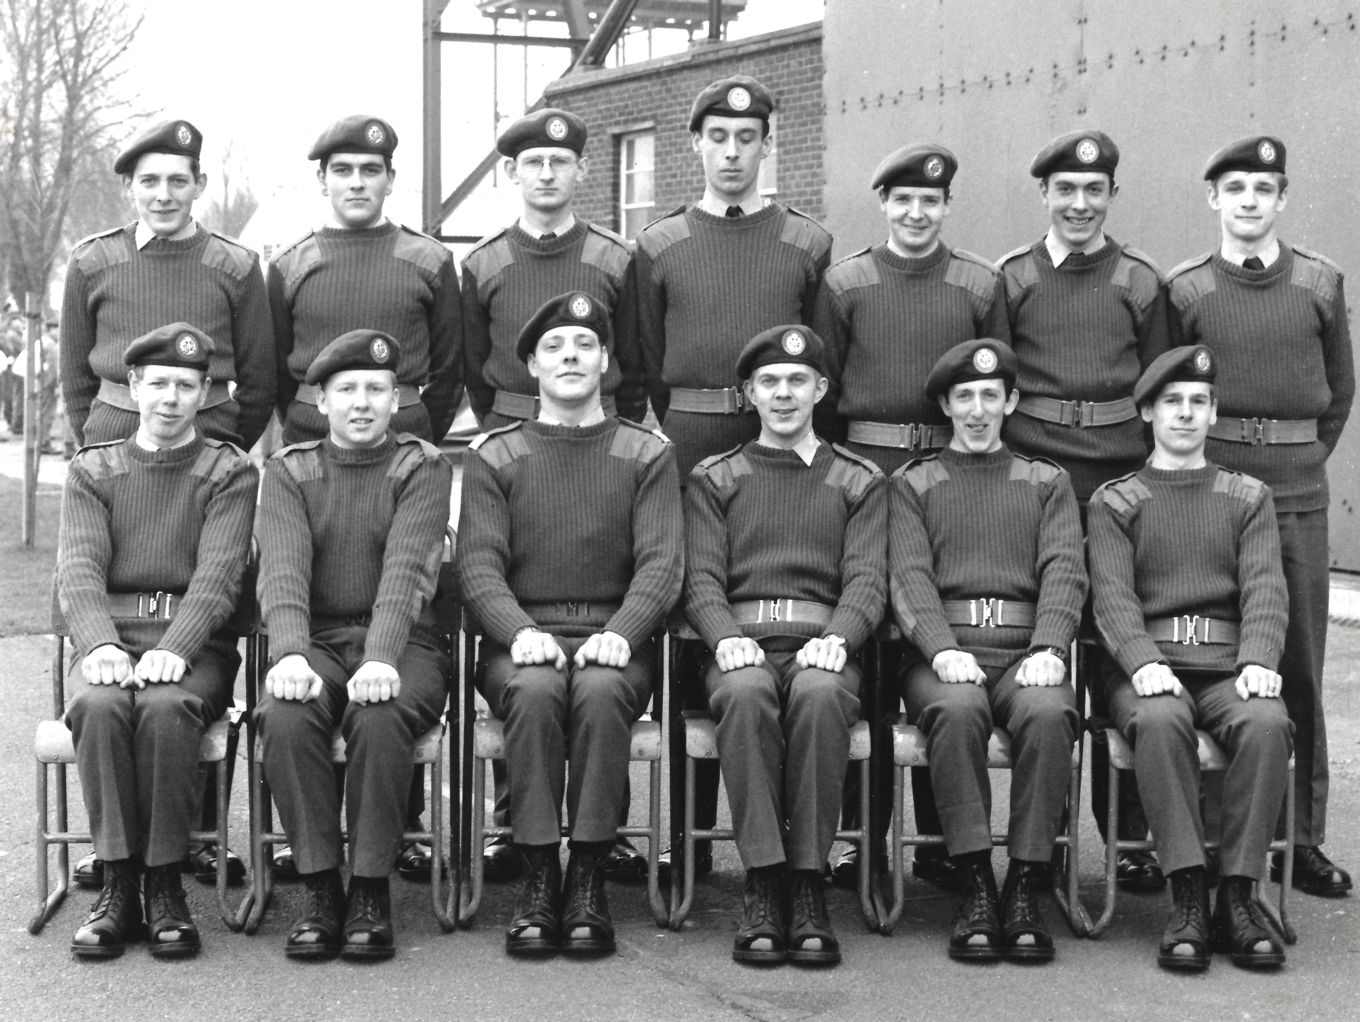 Kev Winks (back row, far right) during the first week of basic training